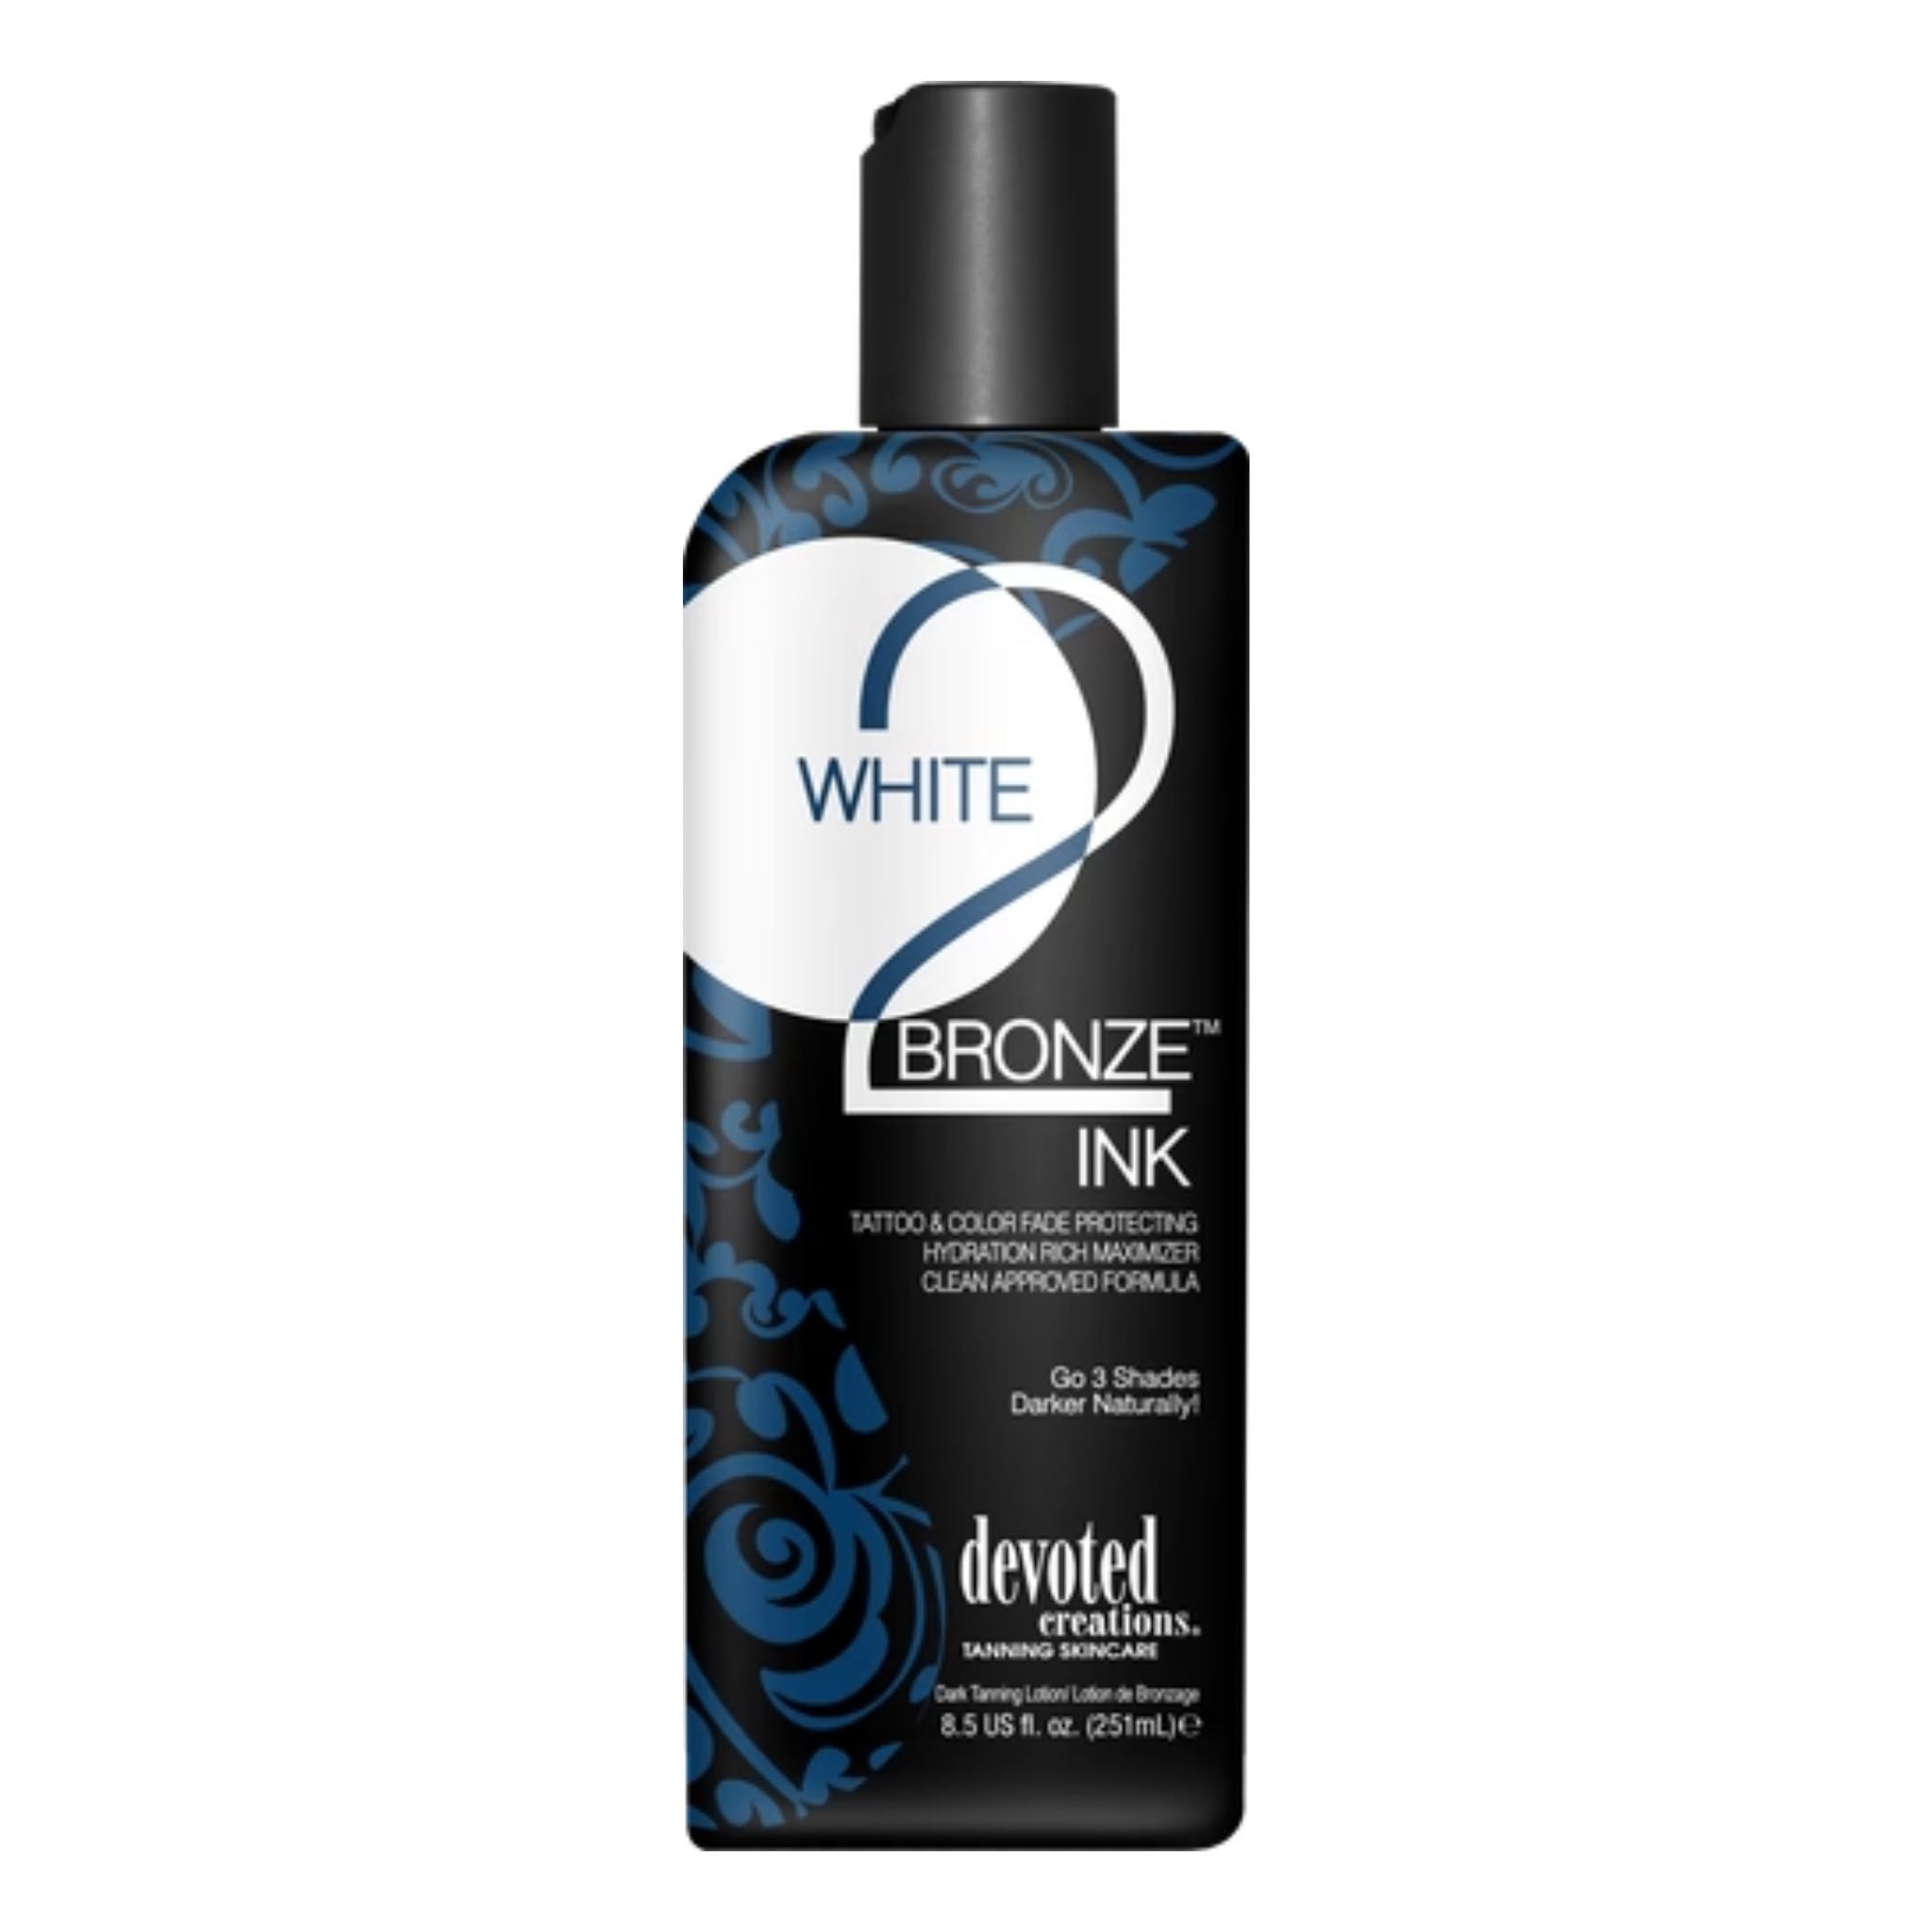 Devoted Creations White 2 Bronze INK Tanning Lotion Tanning Lotion